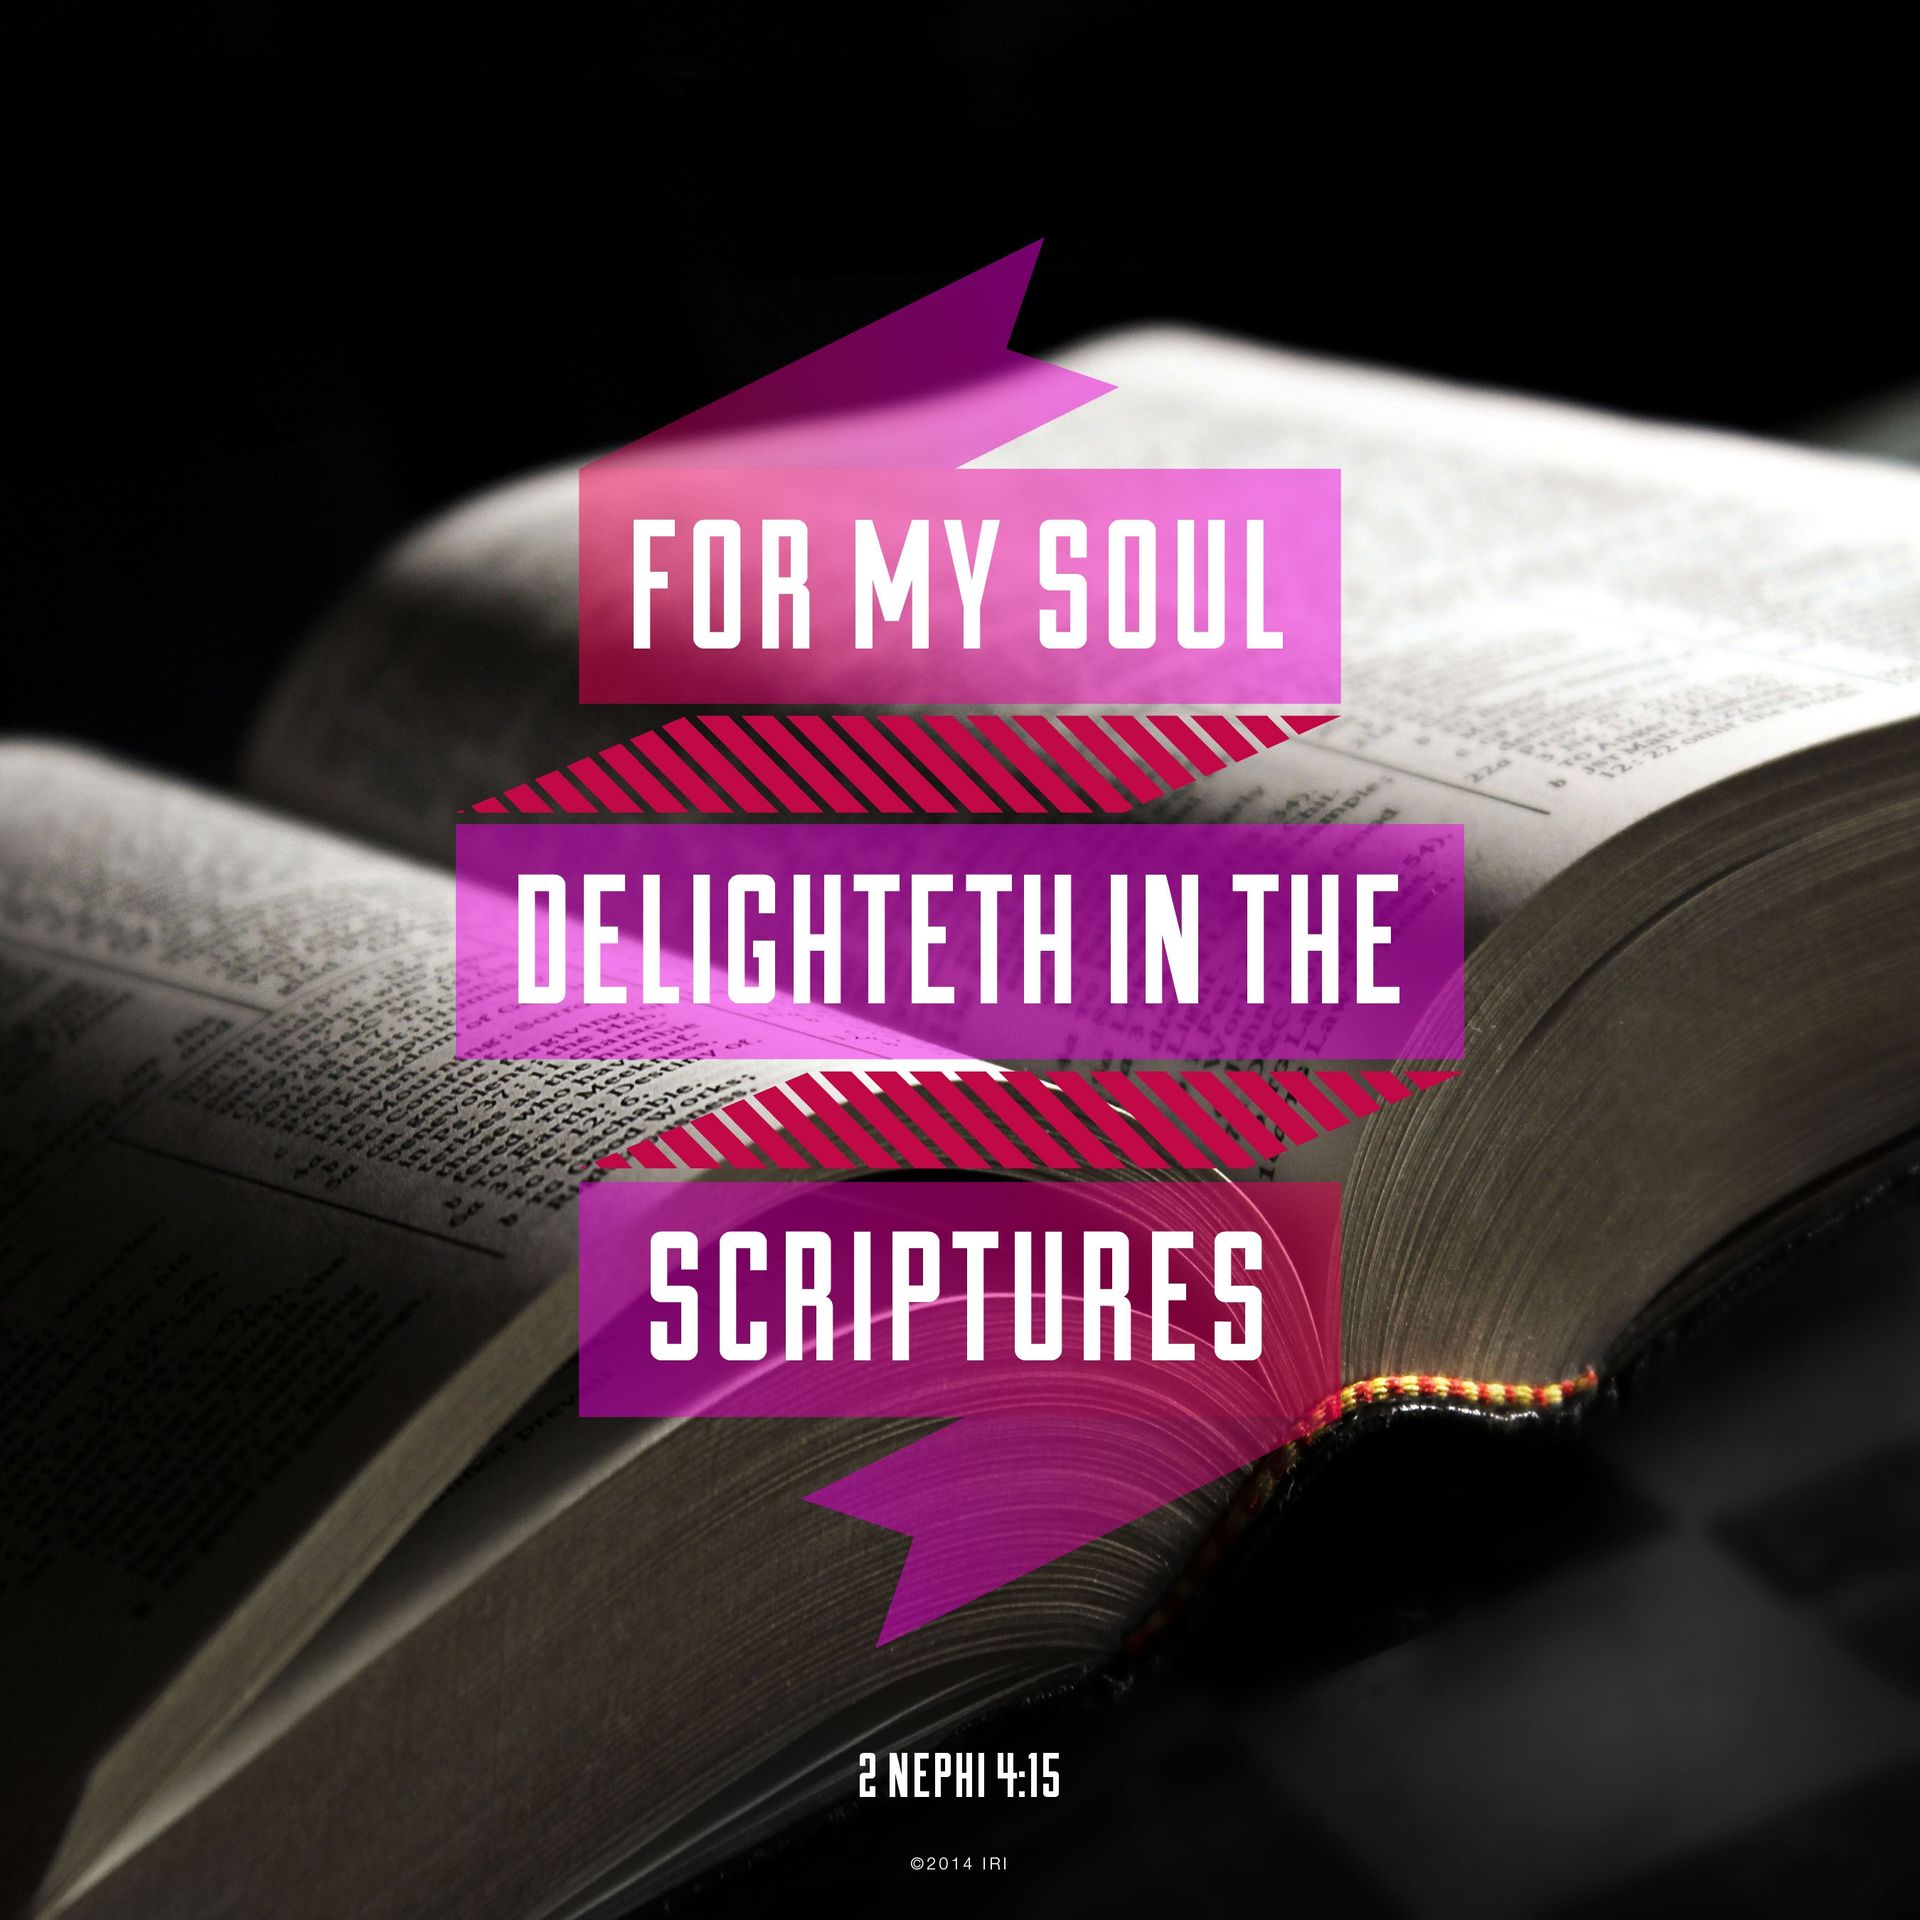 “For my soul delighteth in the scriptures.”—2 Nephi 4:15 © N/A ipCode 1.